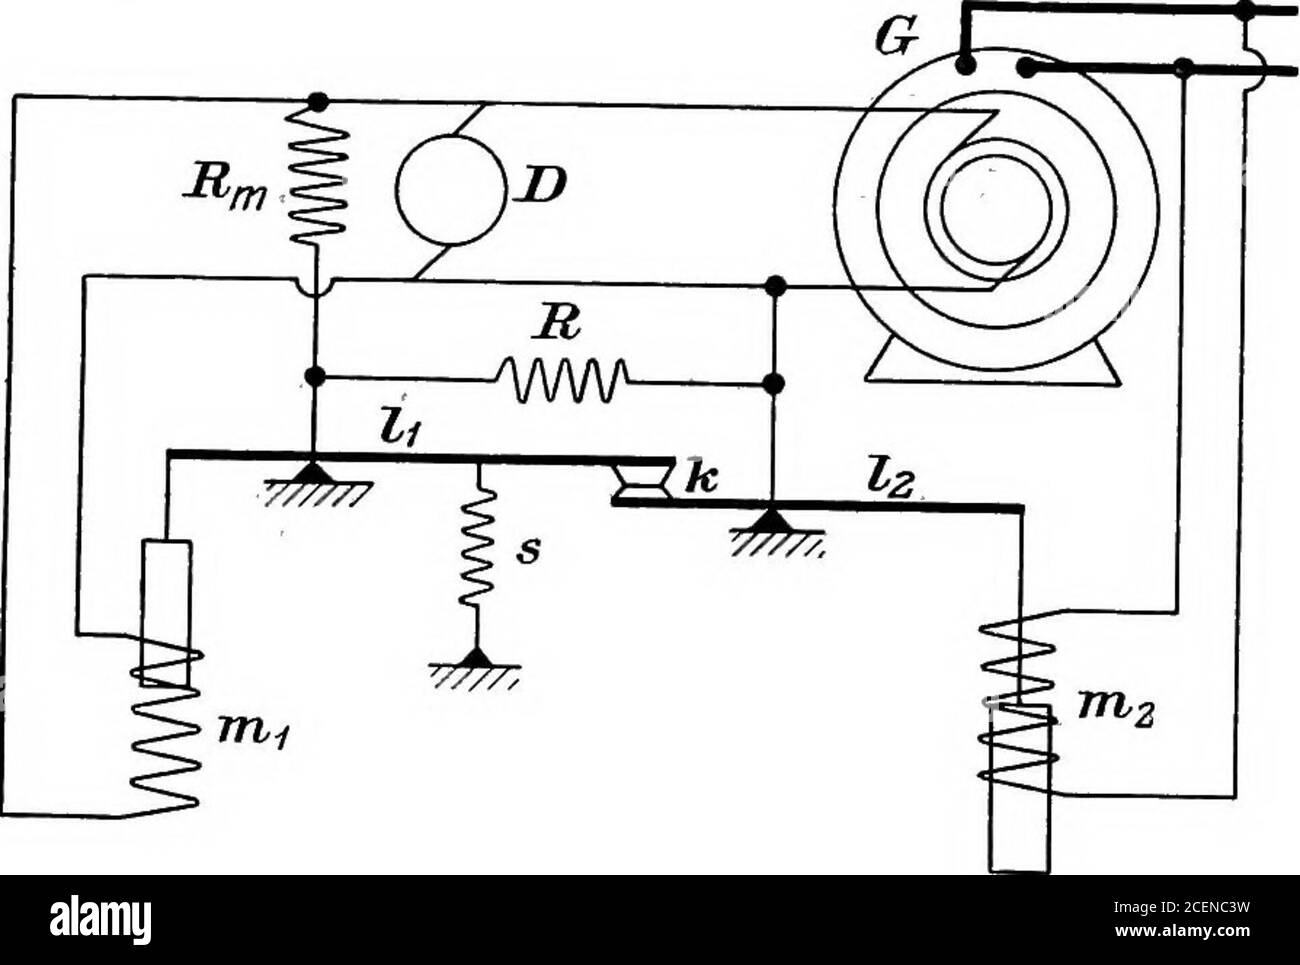 . A text-book of electrical engineering;. which is in series with the fieldwinding J?^ of the dynamo is periodically short-circuited by the contact k,so that the field current is constantly pulsating. The rocking lever l^ issubjected to two opposing forces, due respectively to the spring s and thedownward pull on the soft iron core of the electromagnet w^ the coil ofwhich is connected across the terminals of the dynamo D. The core of theelectromagnet m^, is below its coil so that the upward attractive force isin opposition to the force of gravity. The coil of m^, is connected across thealterna Stock Photo